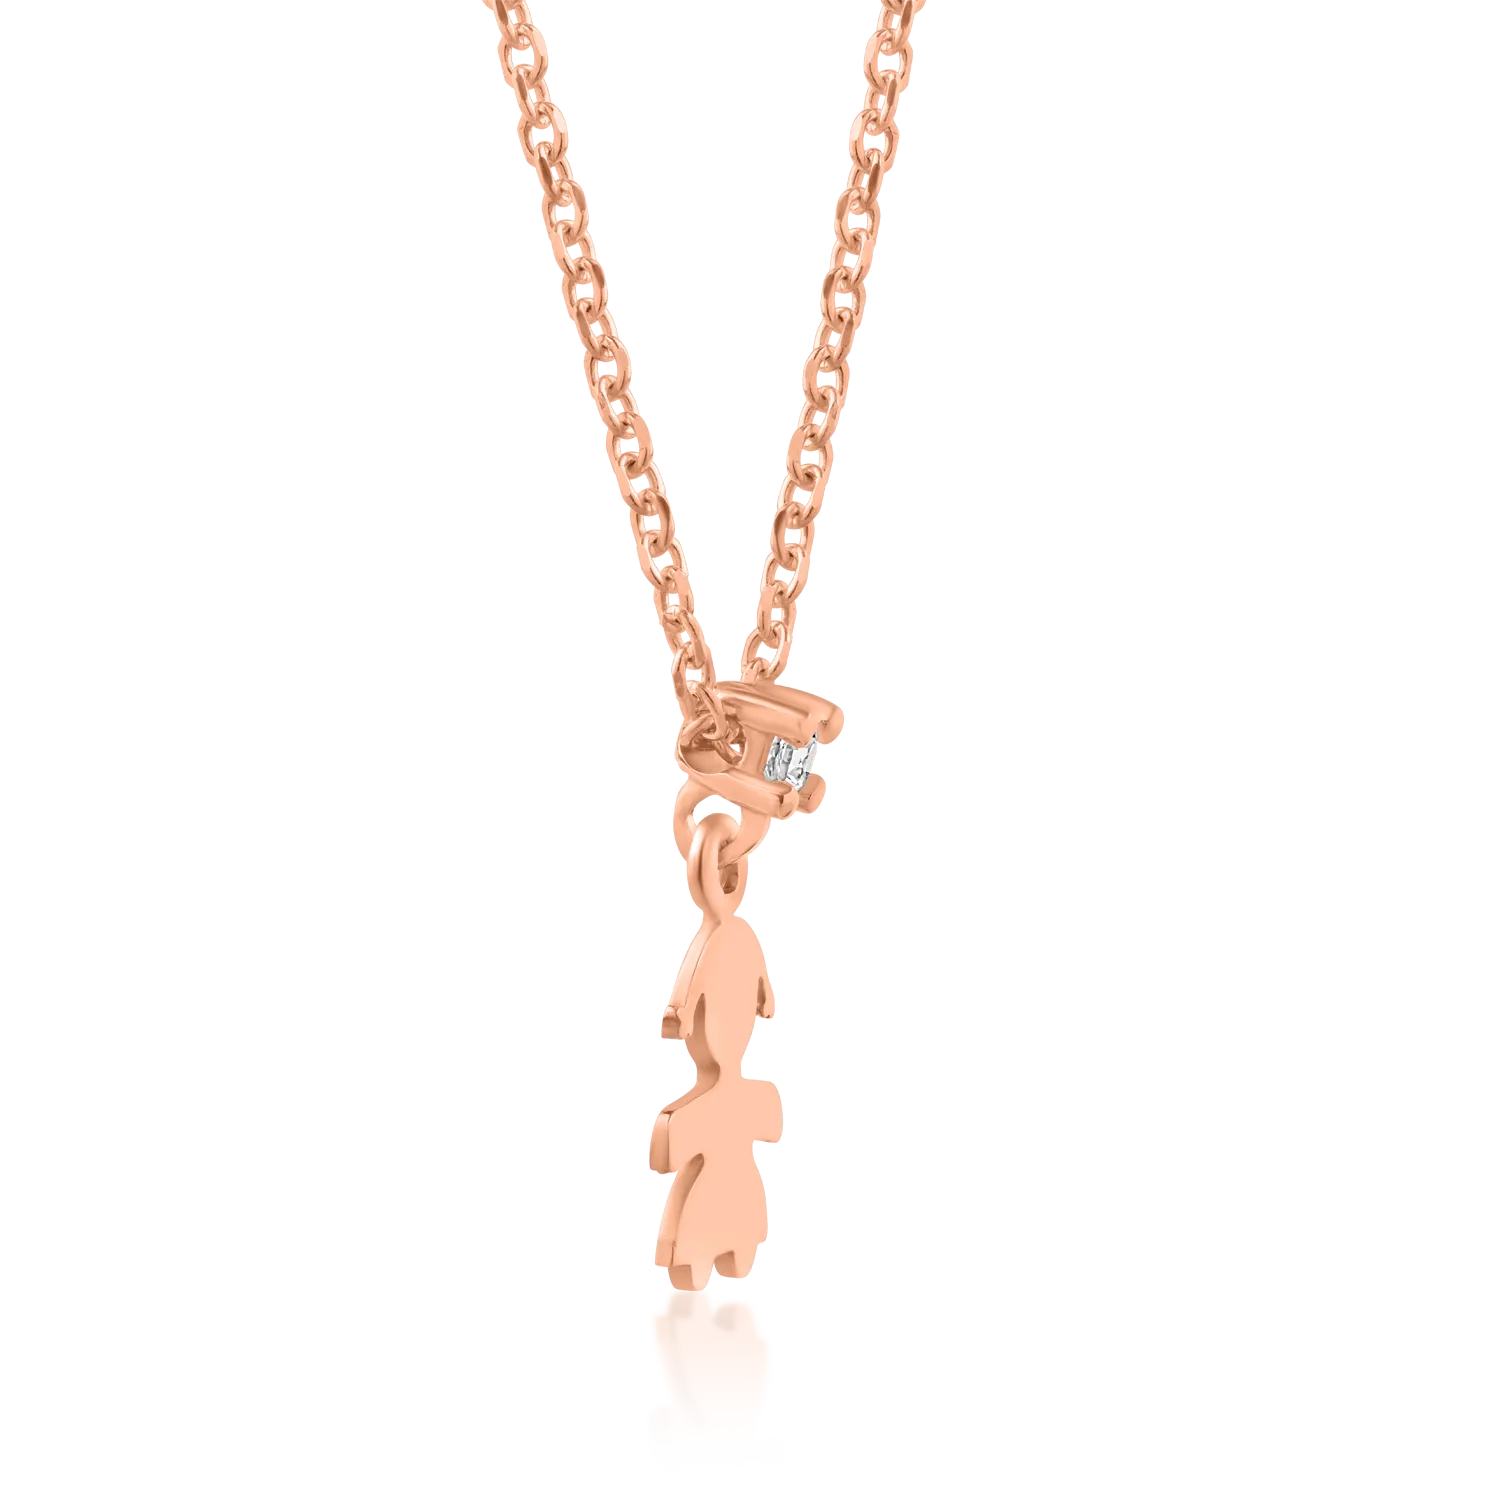 14K rose gold chain with pendant